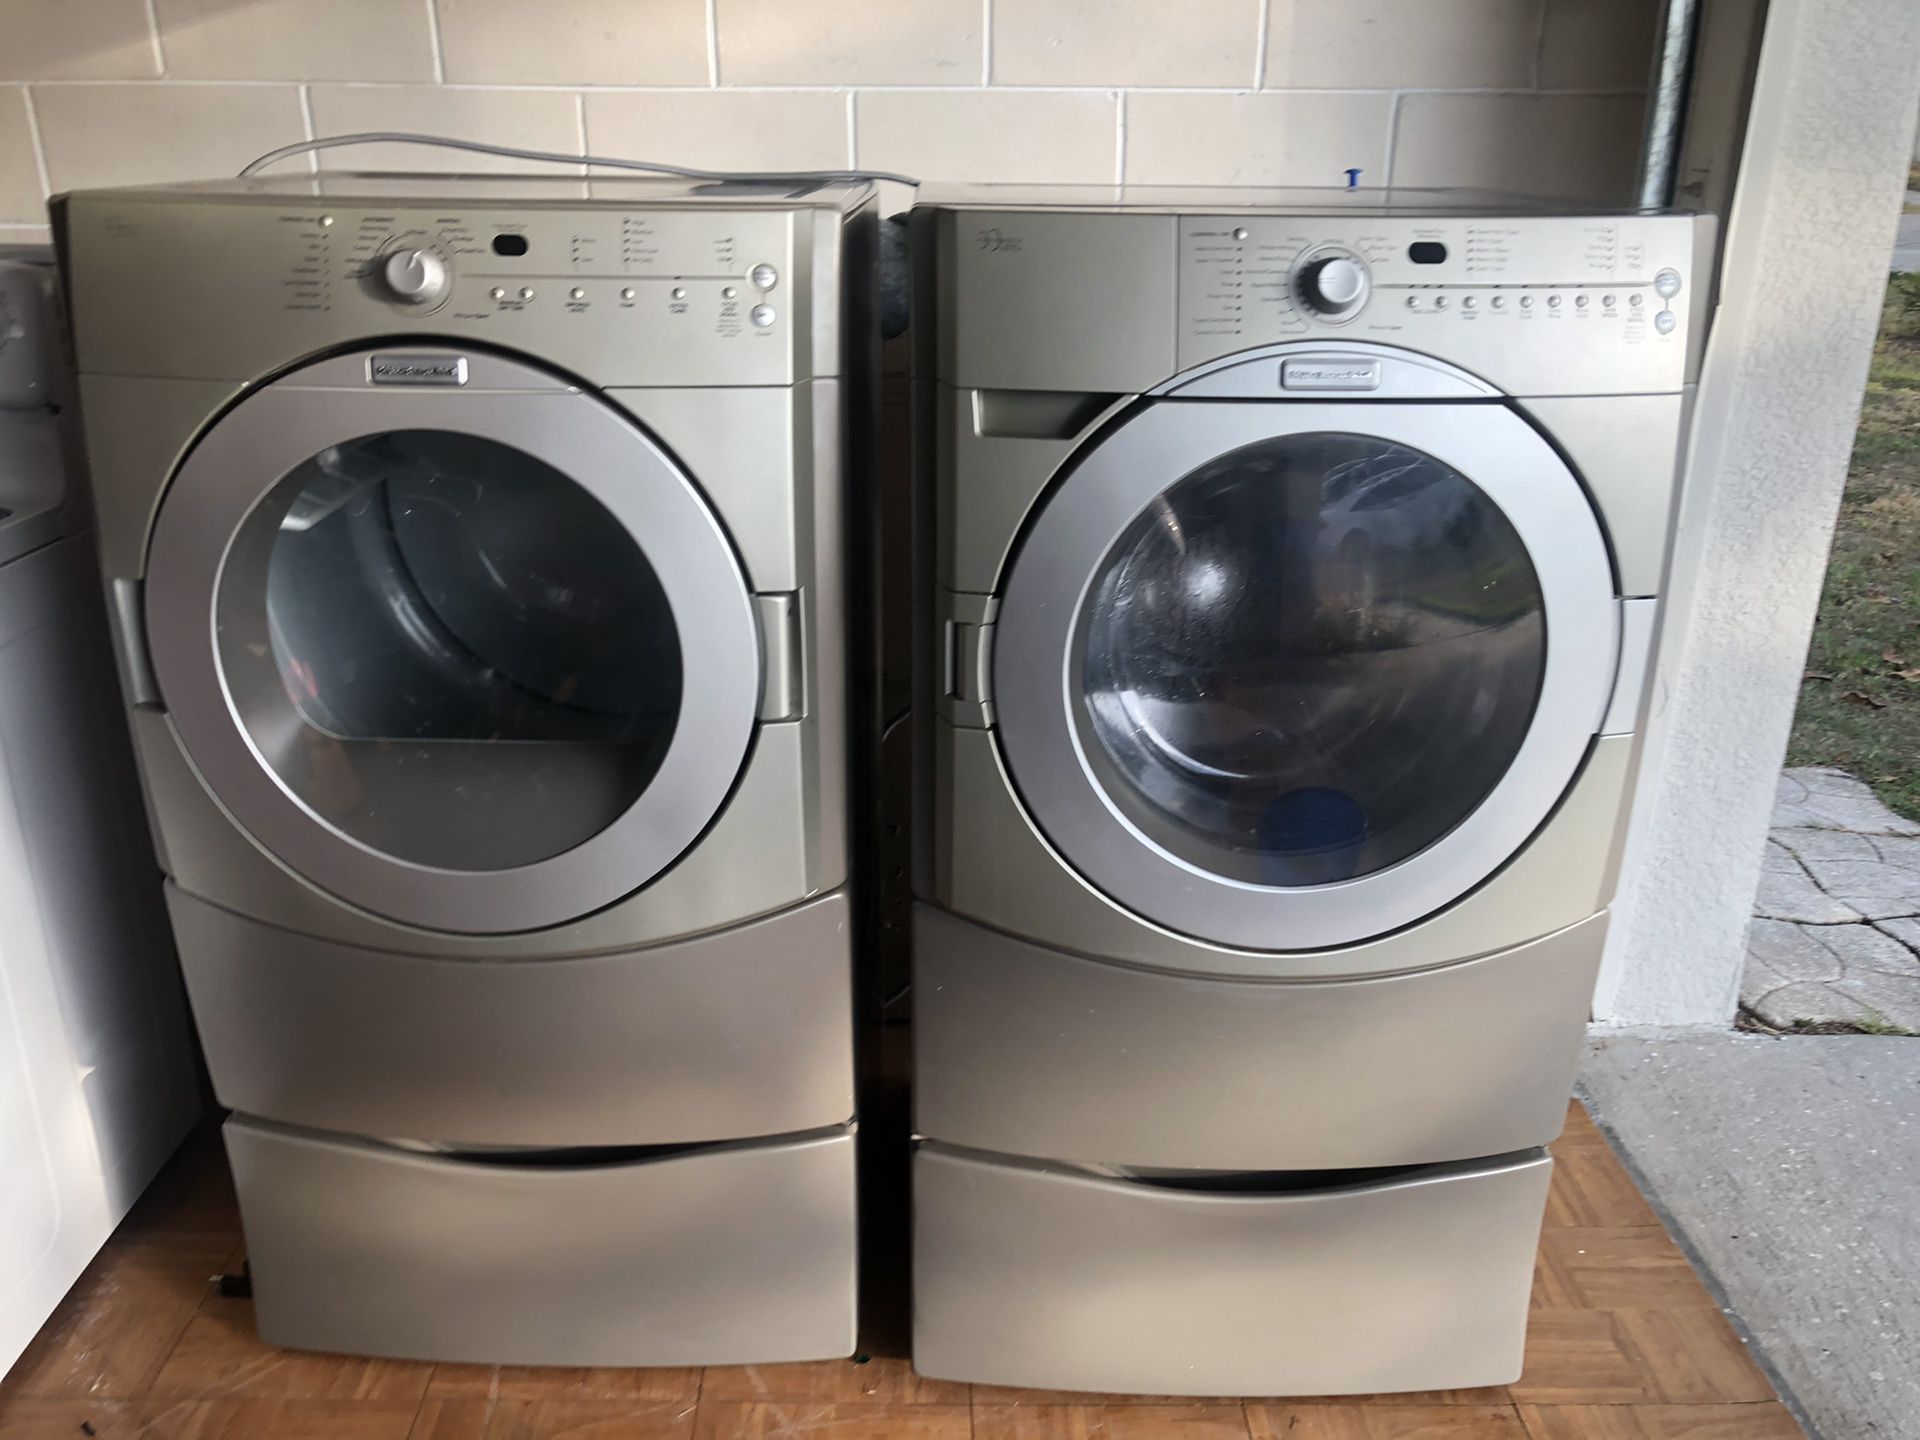 Kitchenaid washer electric and dryer gas